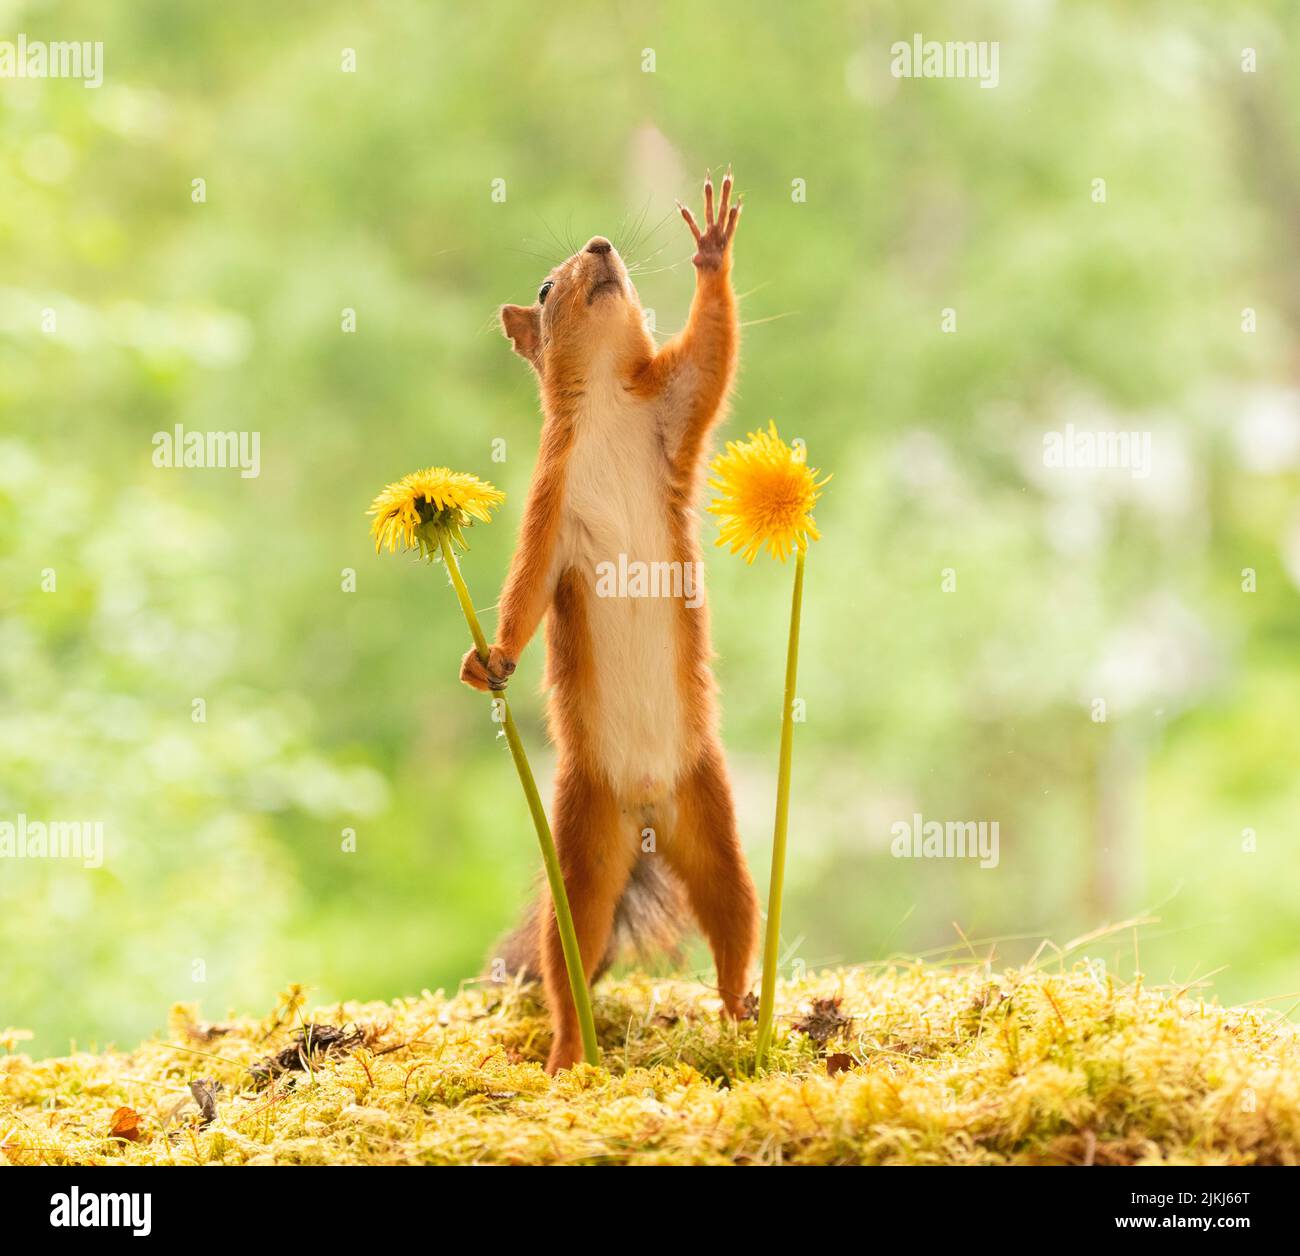 Red Squirrel with dandelion flowers, looking up, reaching Stock Photo